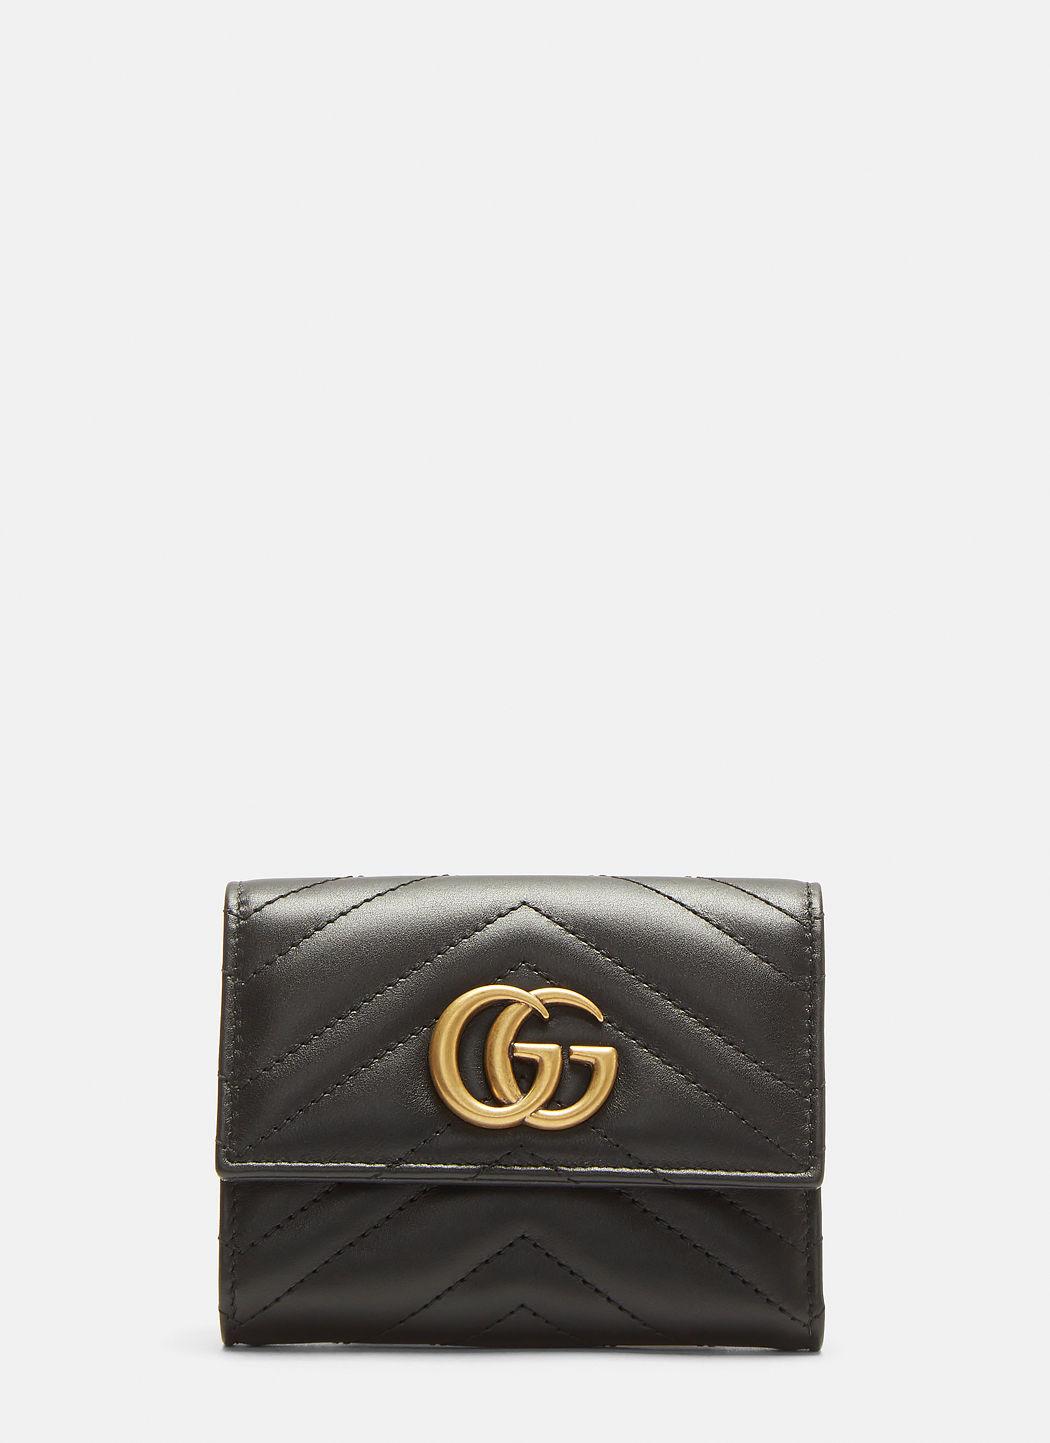 Gucci Marmont Fold-over Snap Stud 